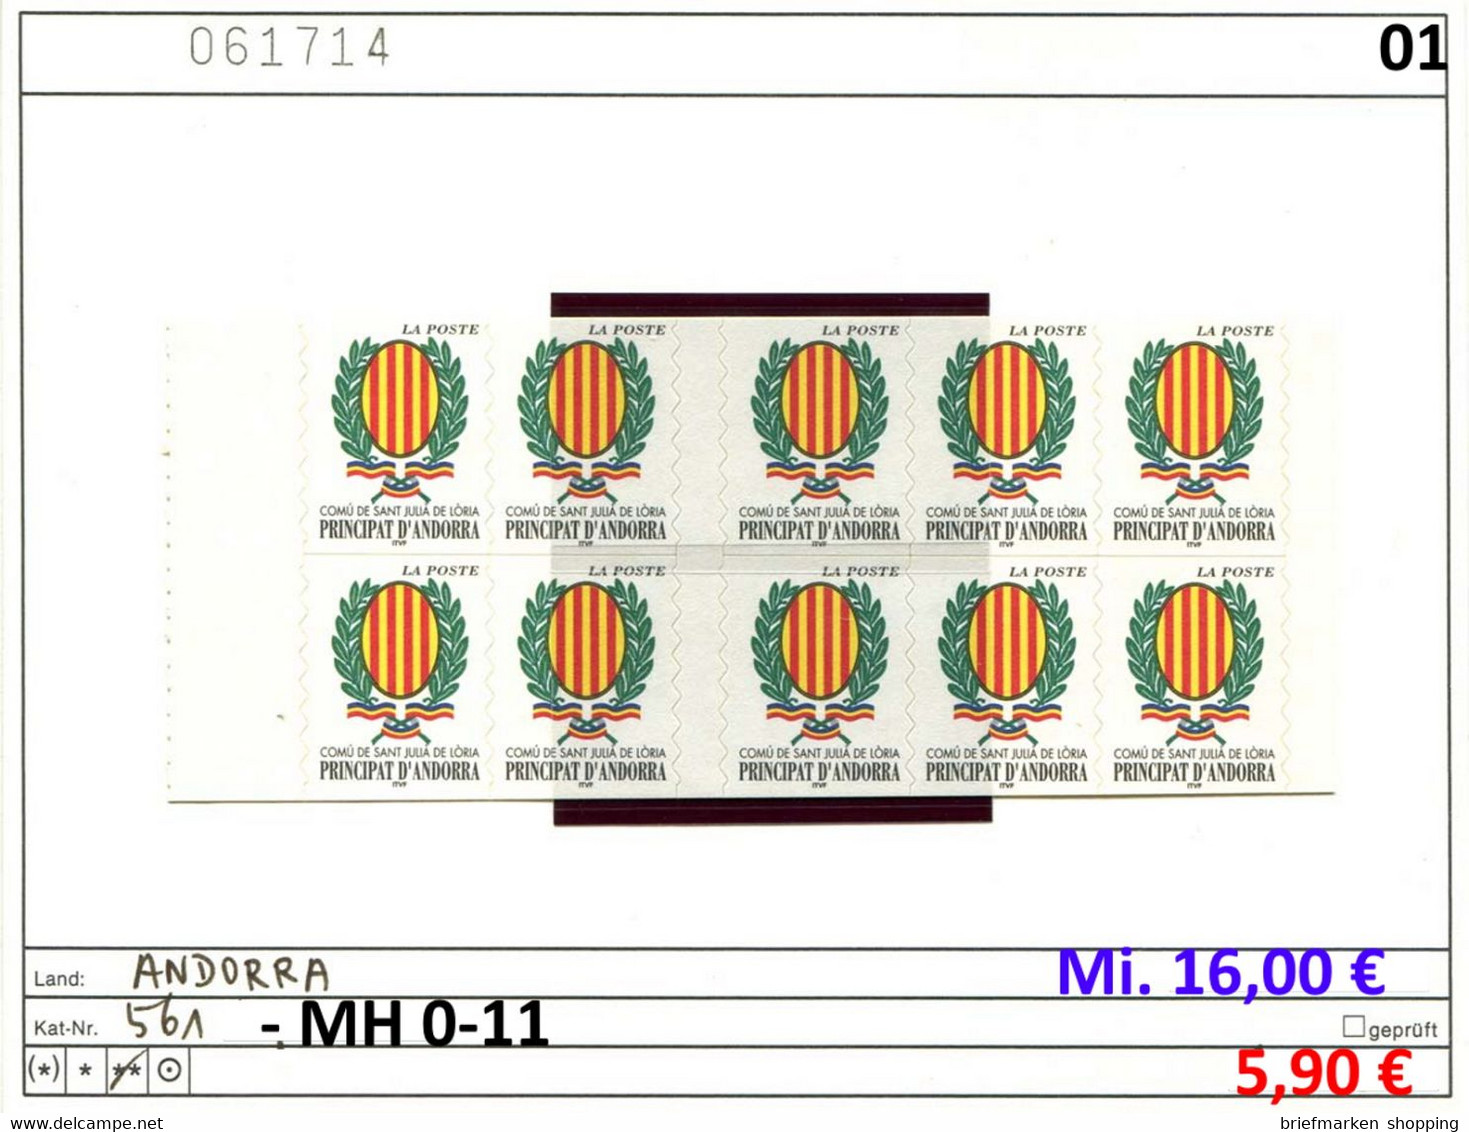 Andorra 2001 - Andorre Francaise 2001 - Michel 561 Im Kpl. MH-011 -  ** Mnh Neuf Postfris - Carnet / Booklet - Booklets